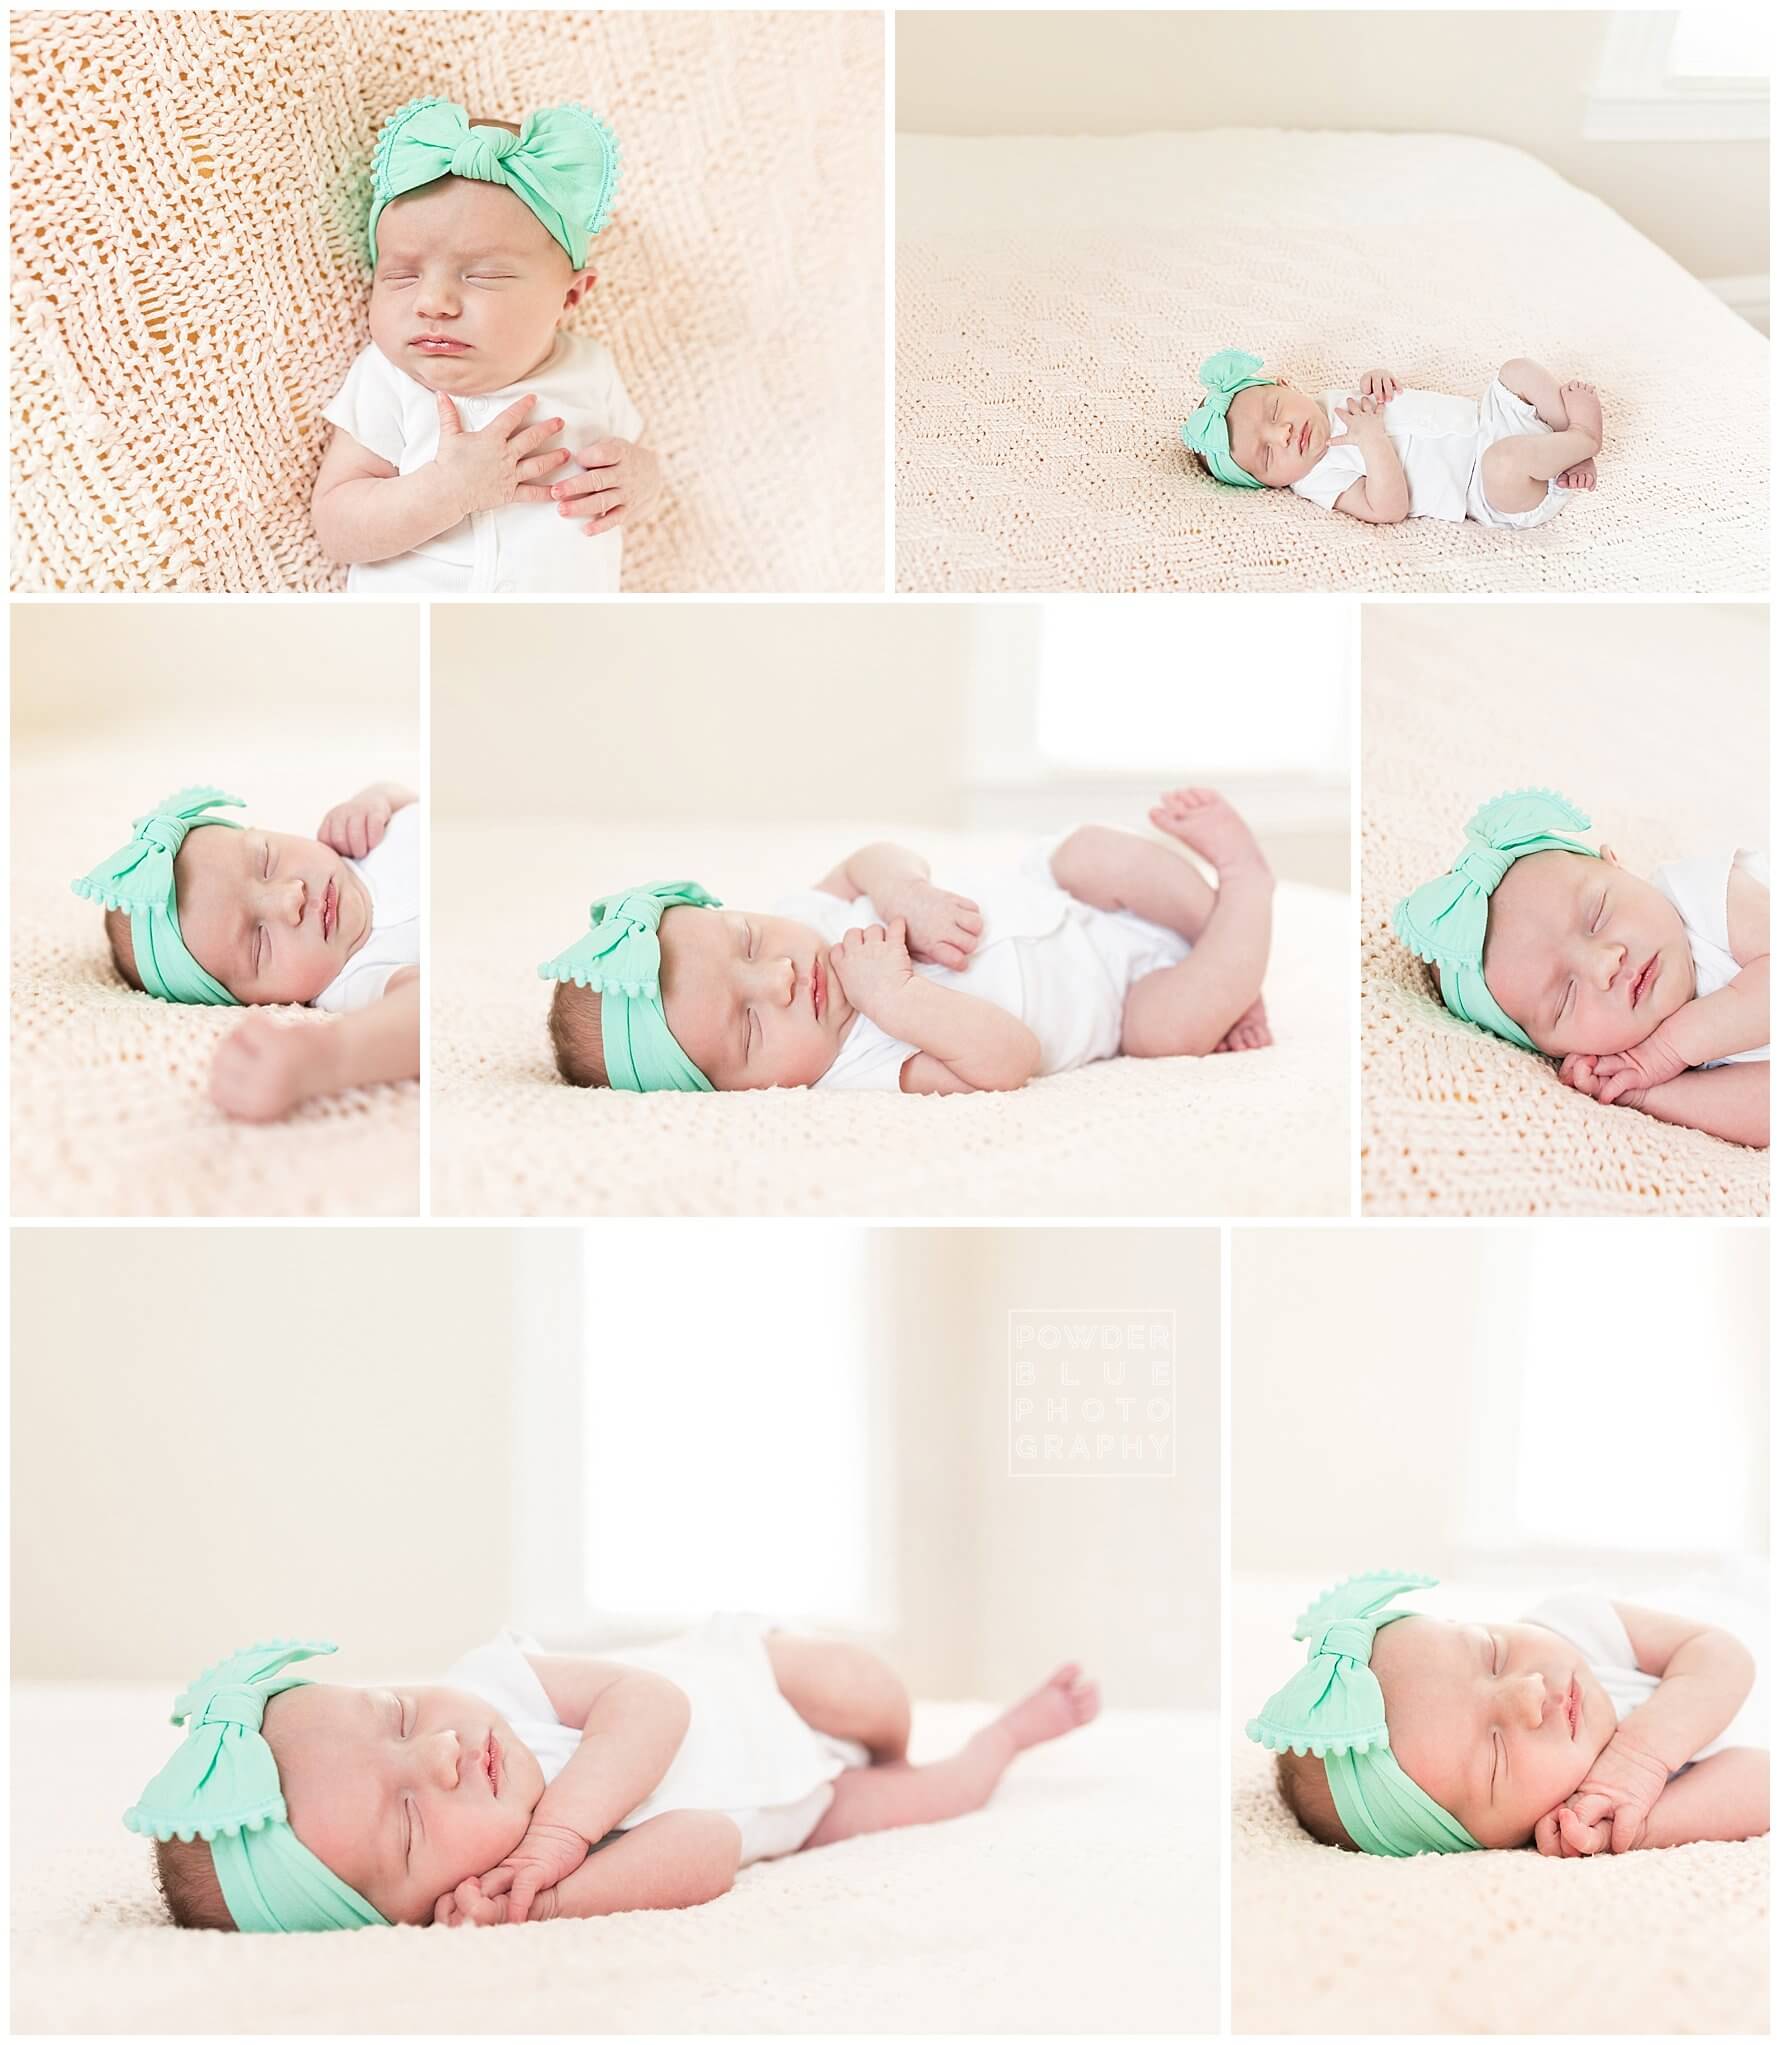 lifestyle newborn images on a bed using window light and fill flash.  newborn baby girl wearing green headband and a white kimono onesie.